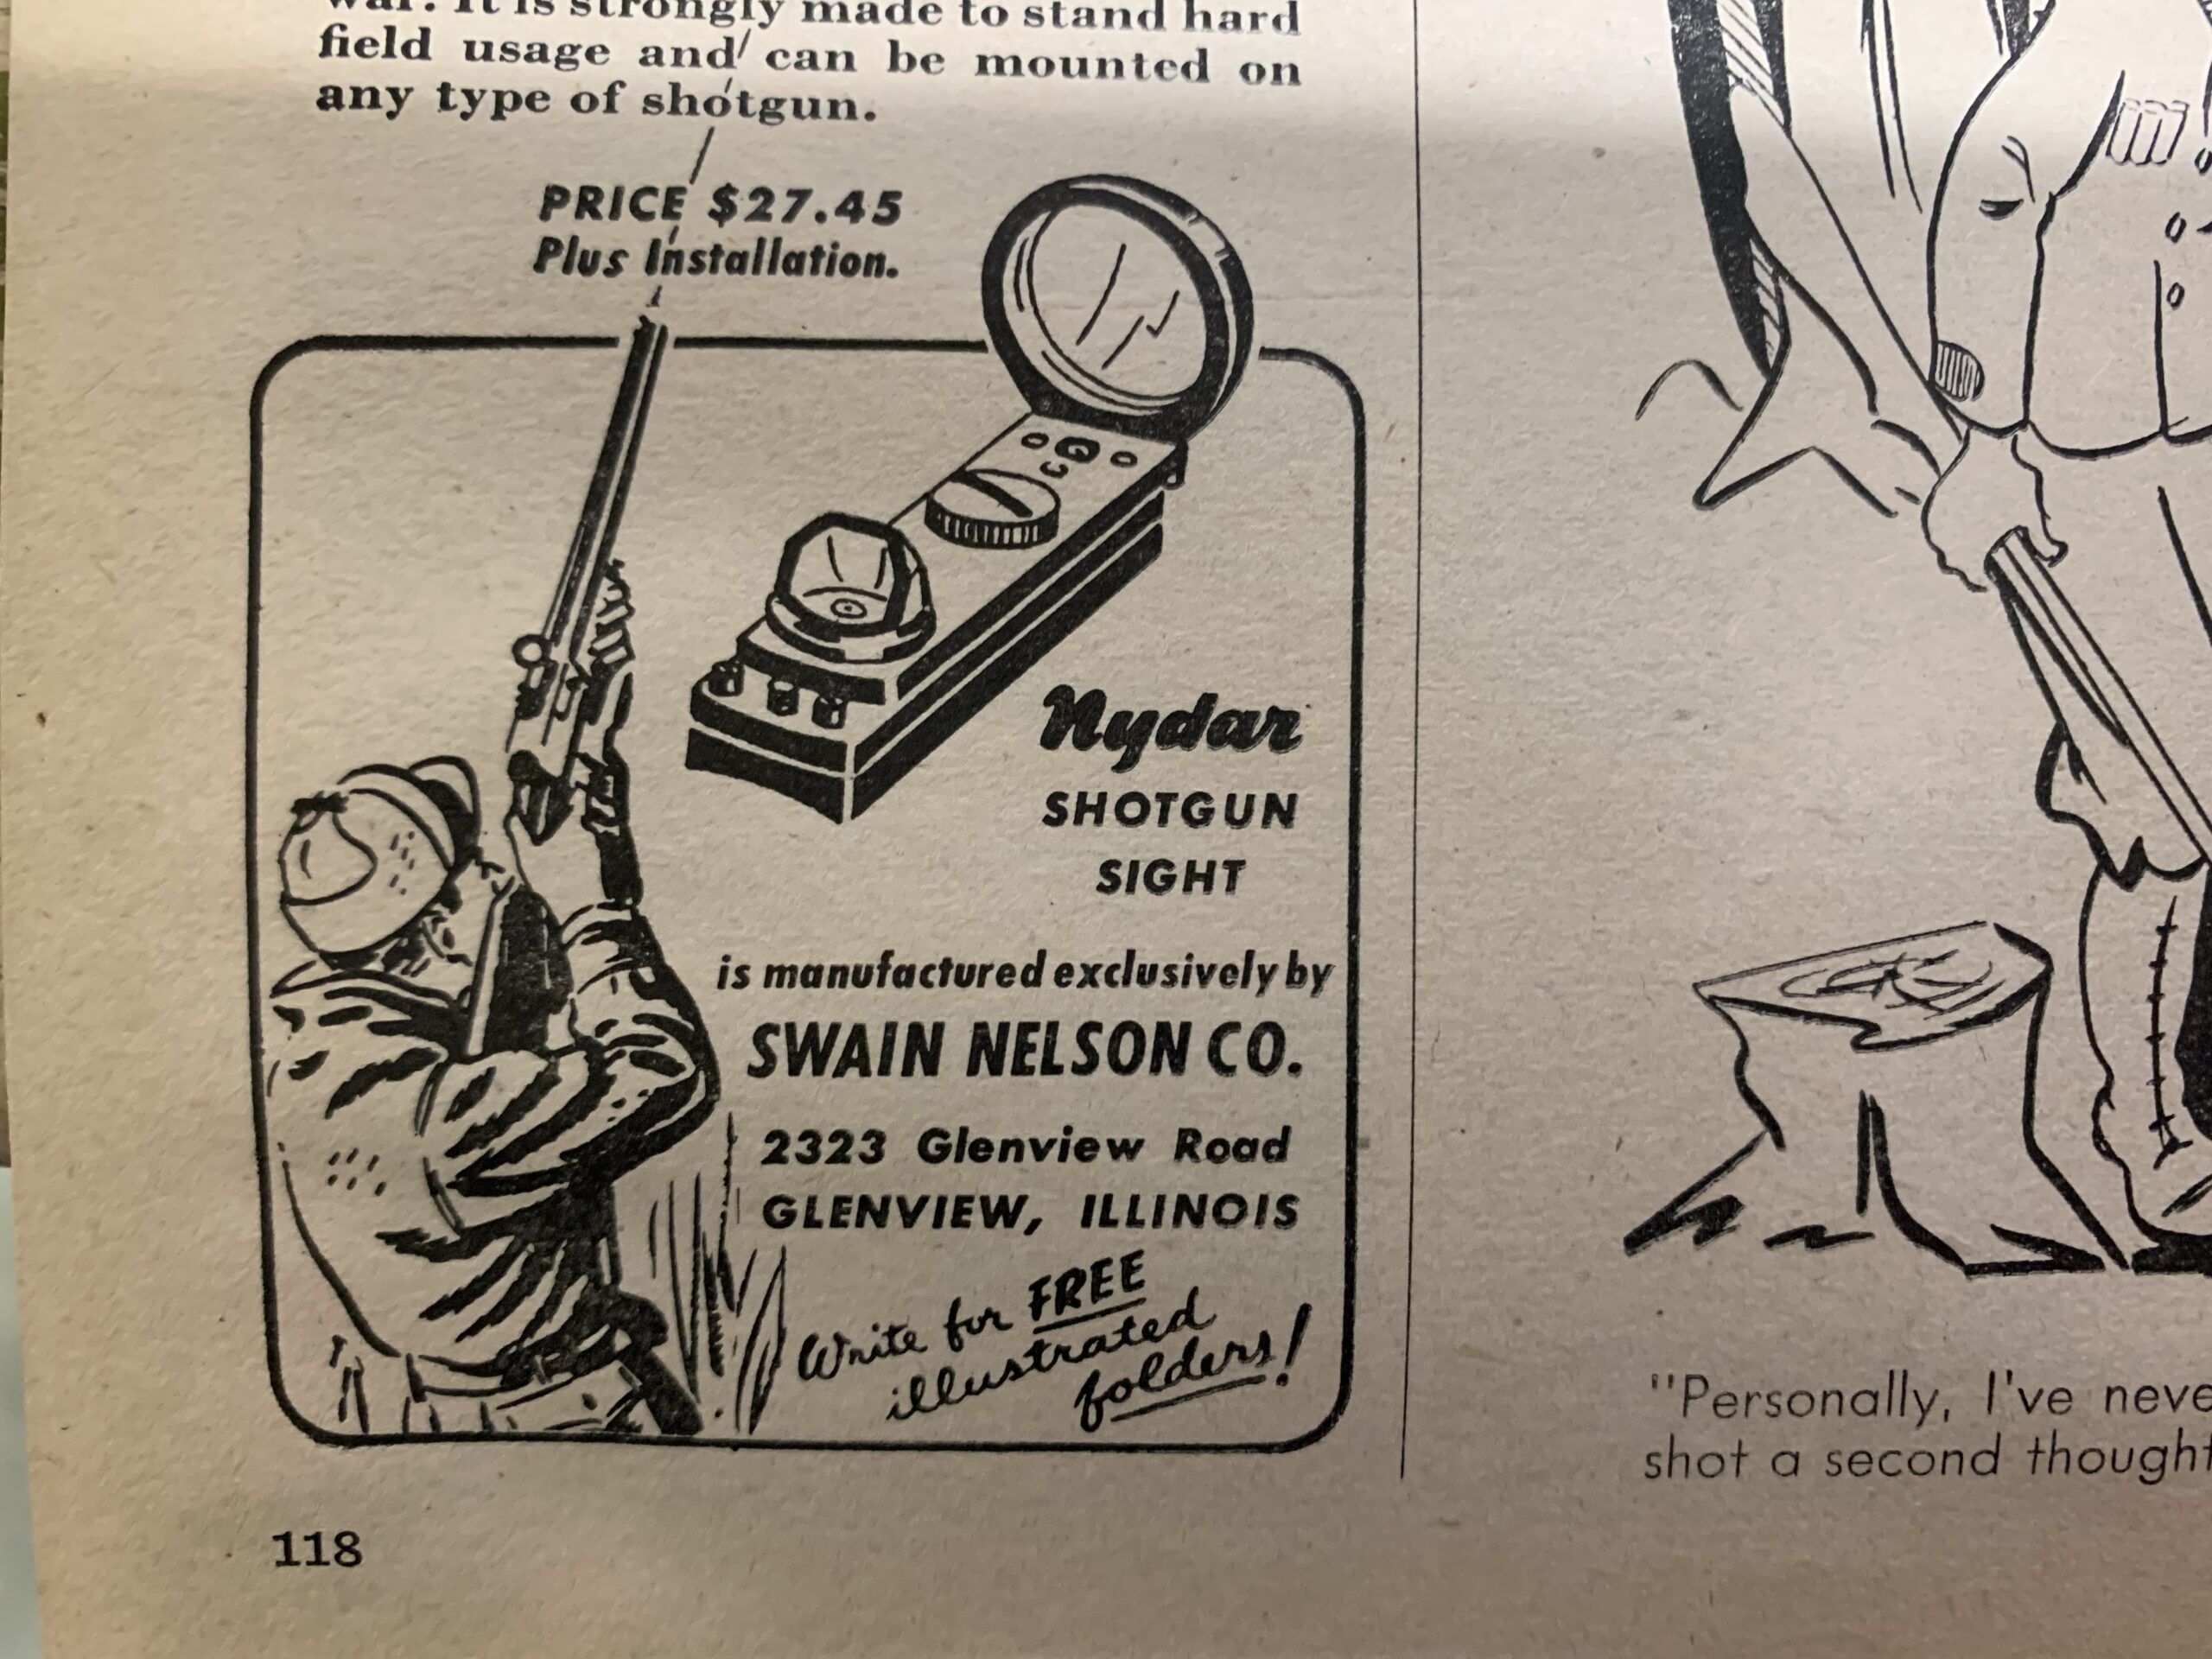 An early electronic reflex sight for shotguns in 1946